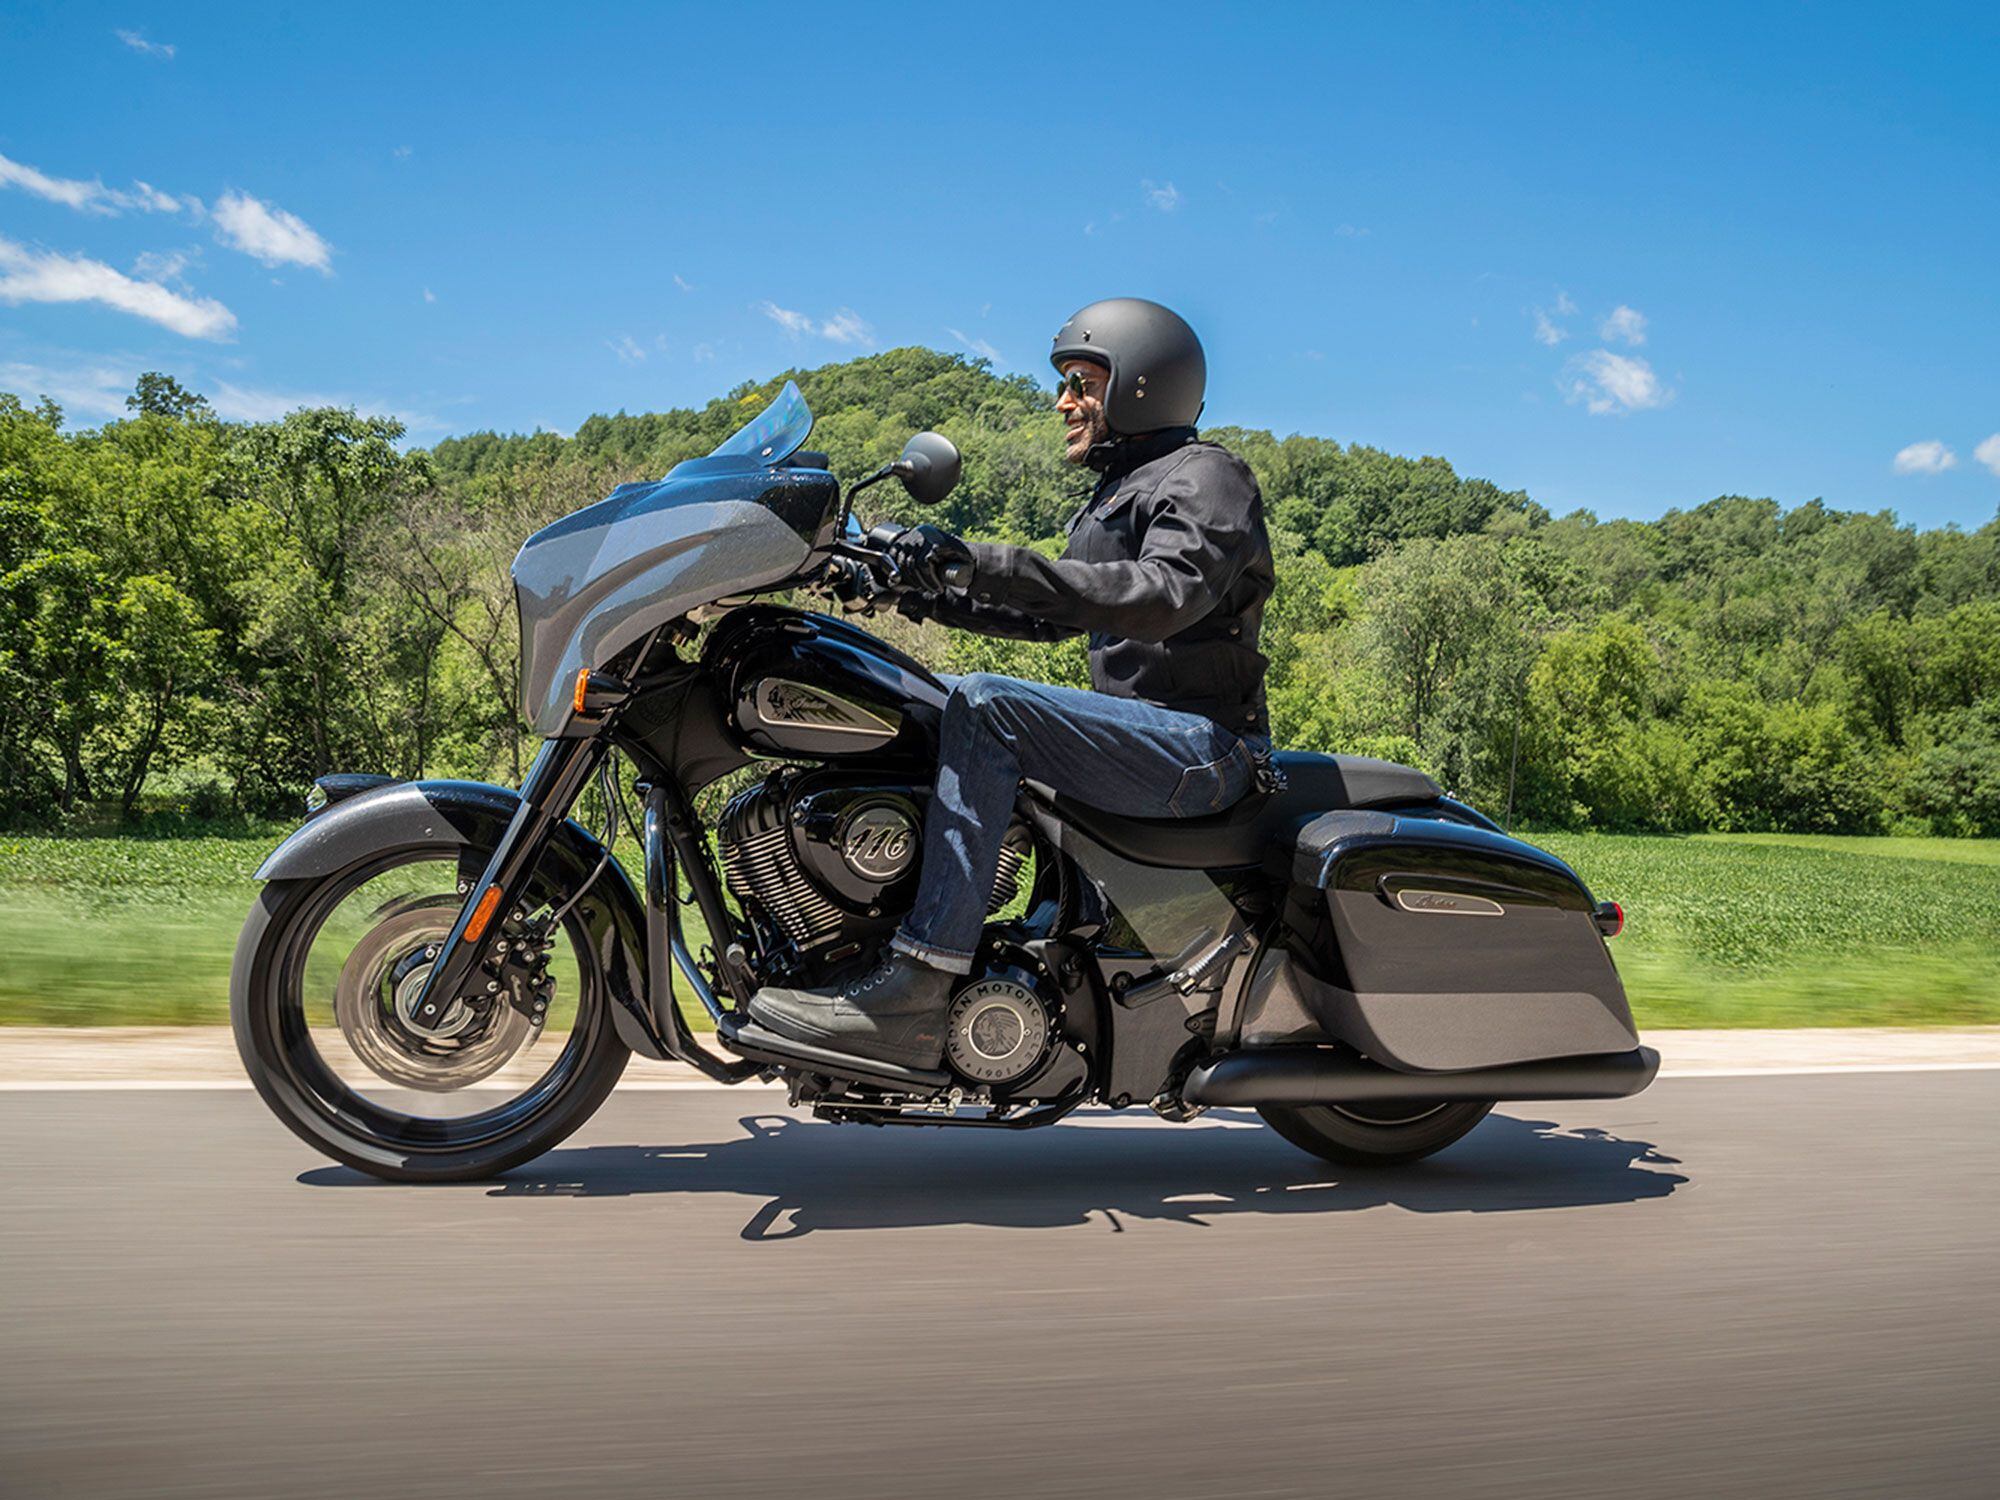 The 116 Thunderstroke V-twin pushes out 126 pound-feet of torque and wears an exclusive Slate Smoke finish.